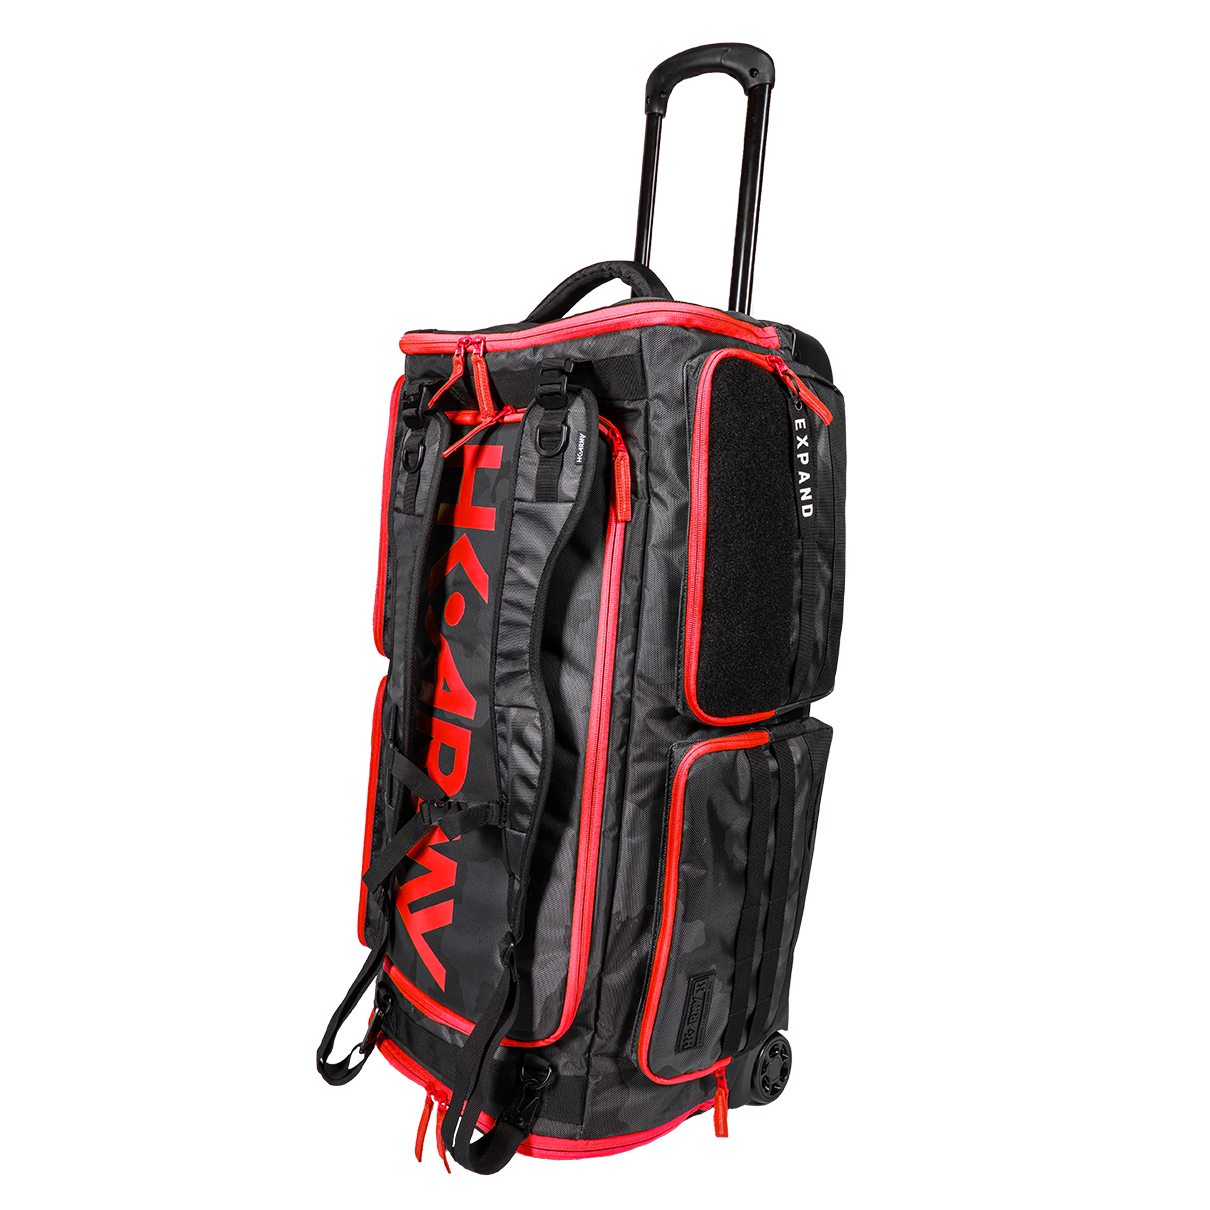 Paintball Gear Bags, Expand Collection